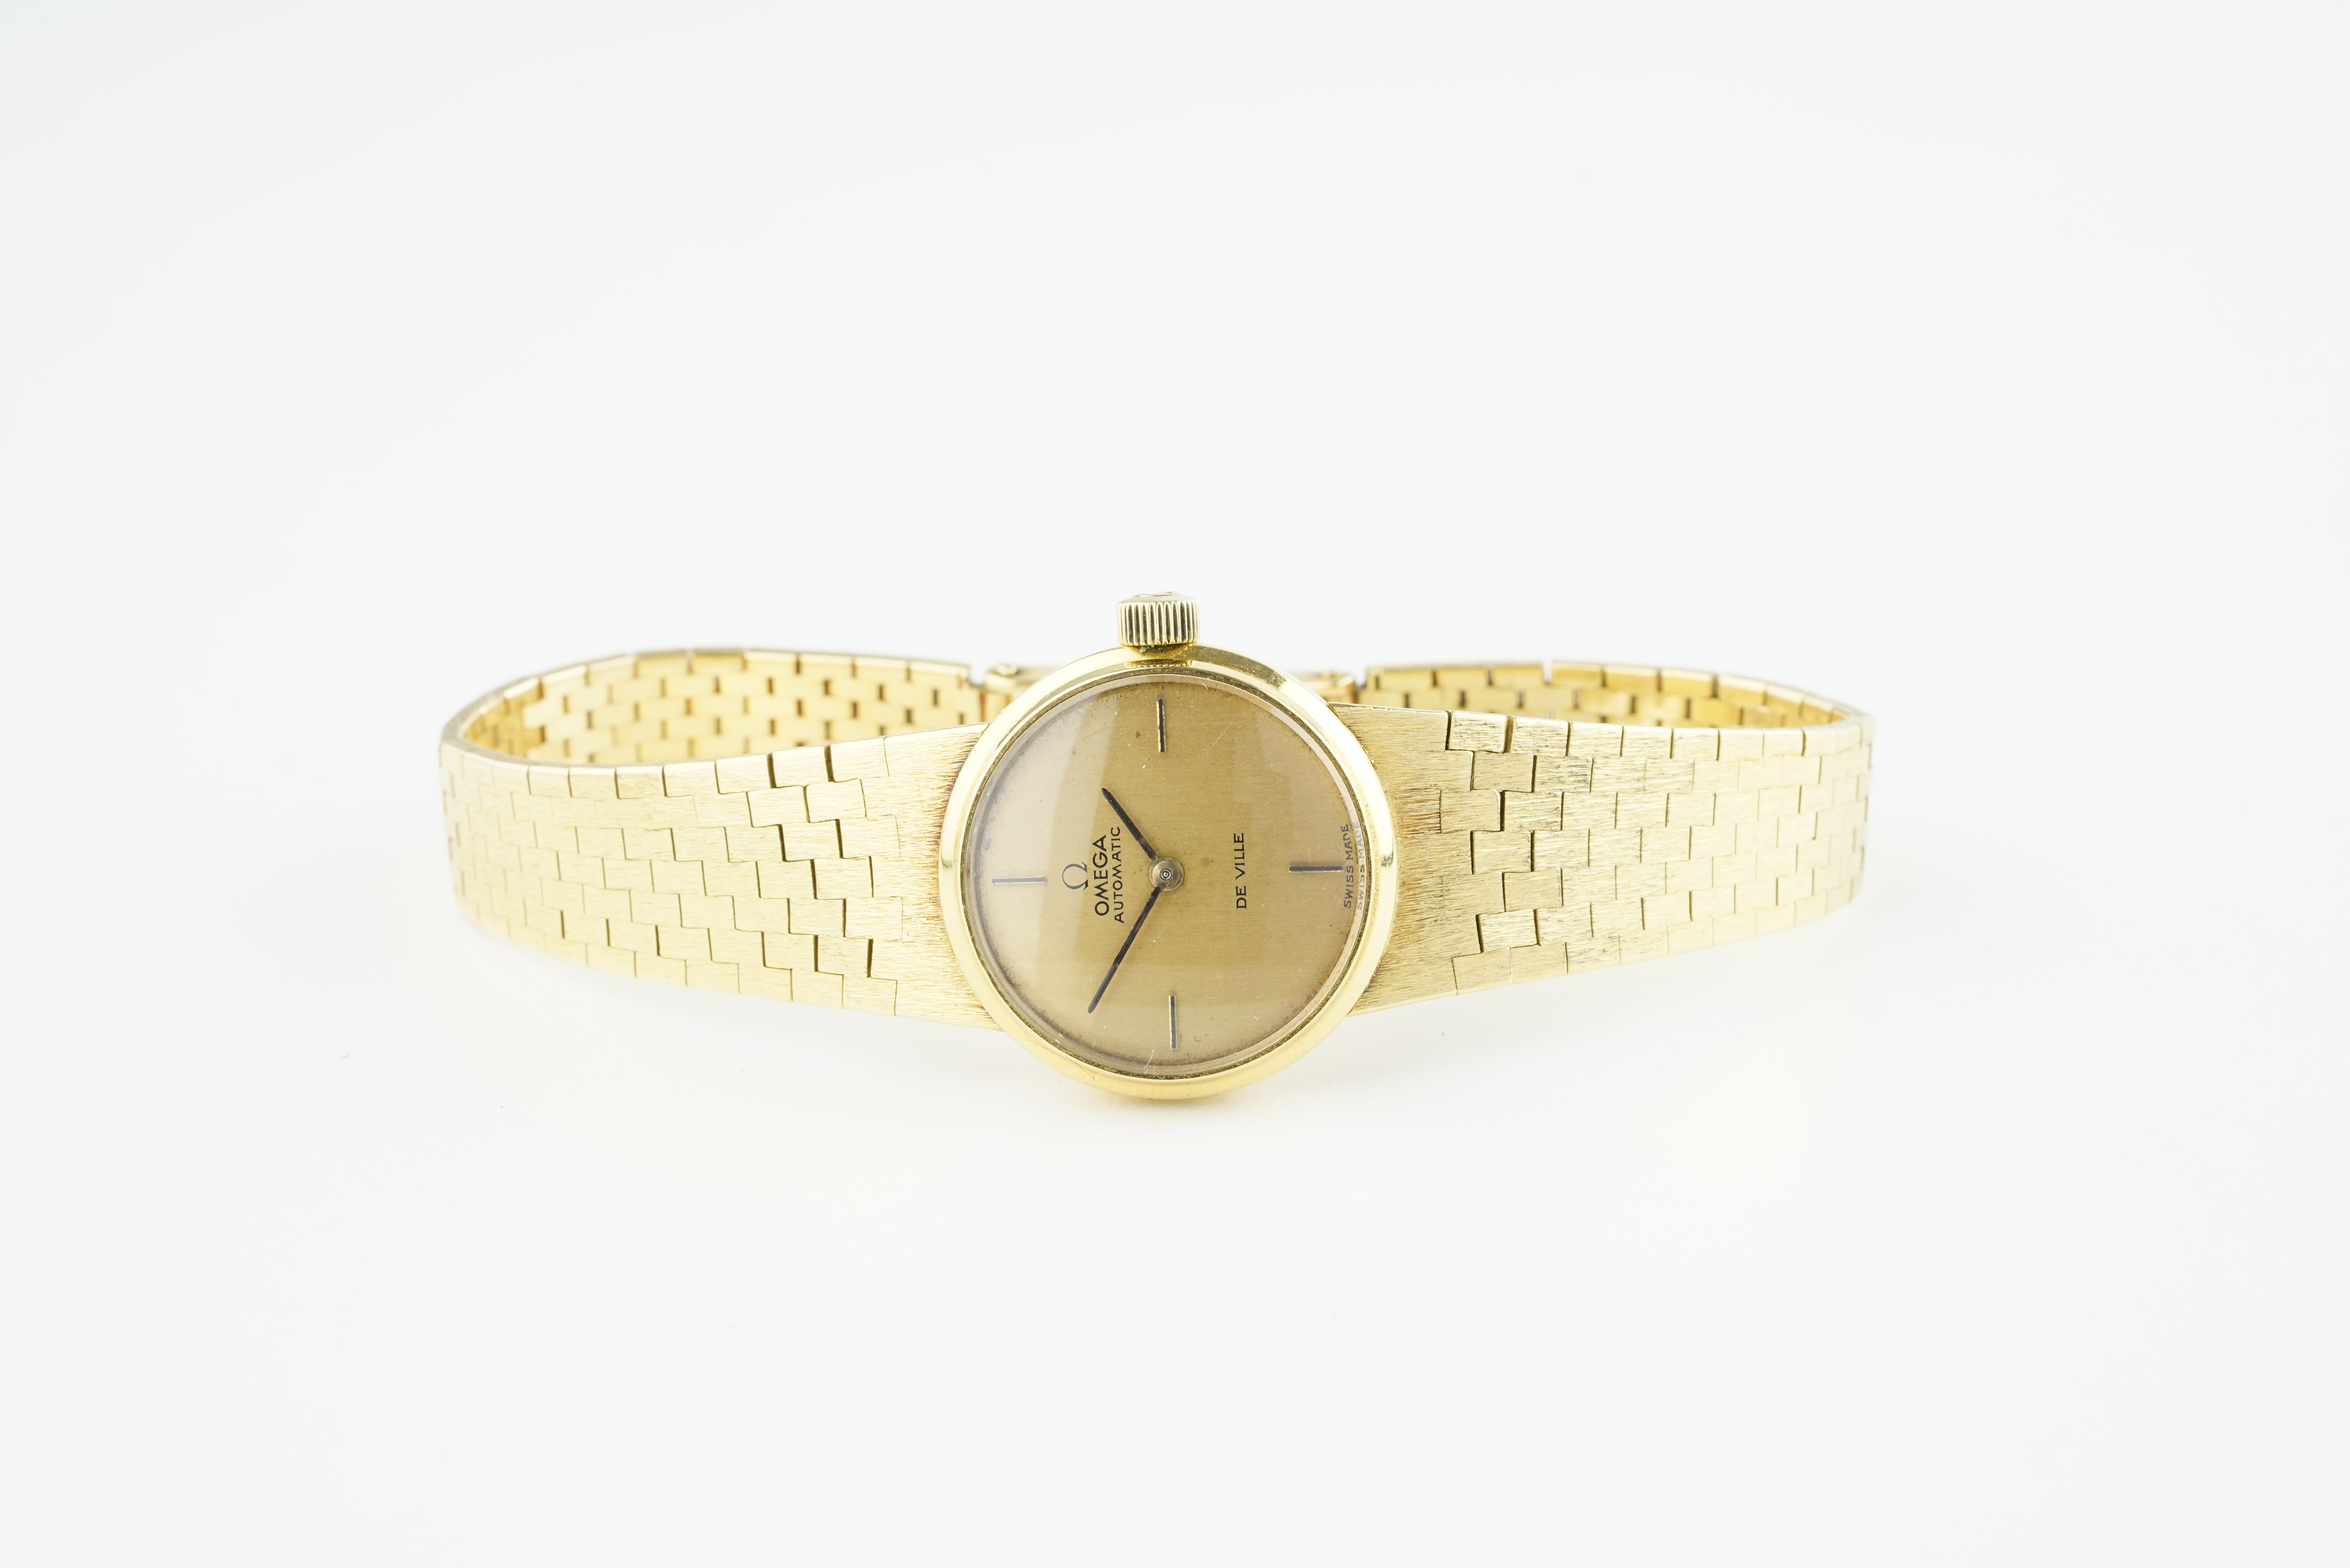 LADIES OMEGA DE VILLE 18CT GOLD WRISTWATCH, circular gold dial with hour markers and hands, 22mm